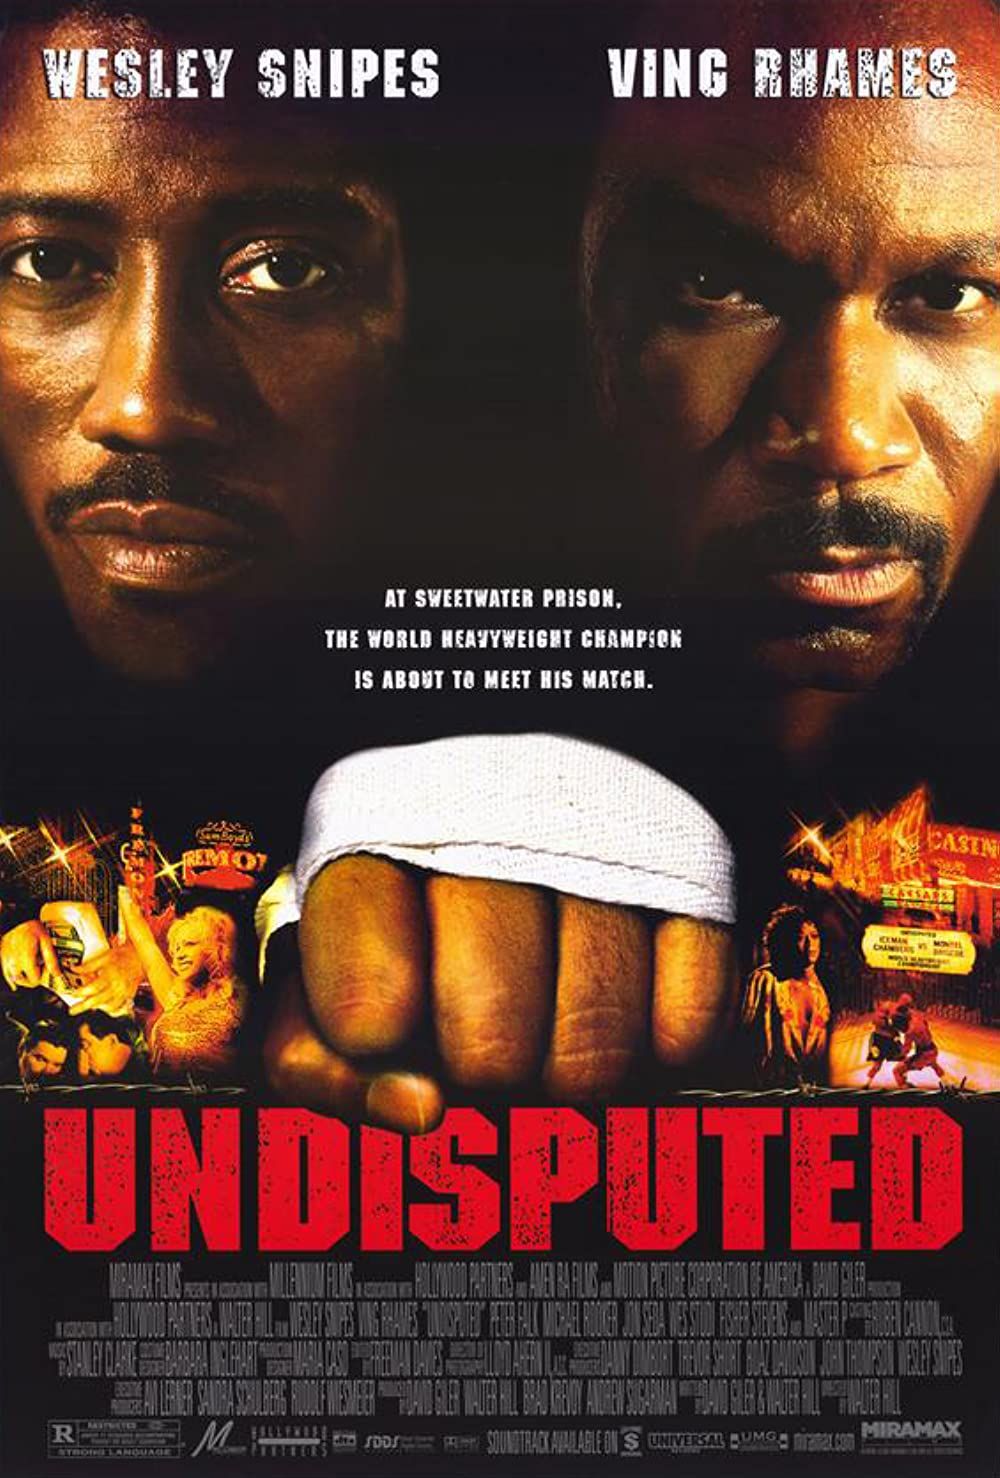 Undisputed (2002) Hindi Dubbed BluRay download full movie